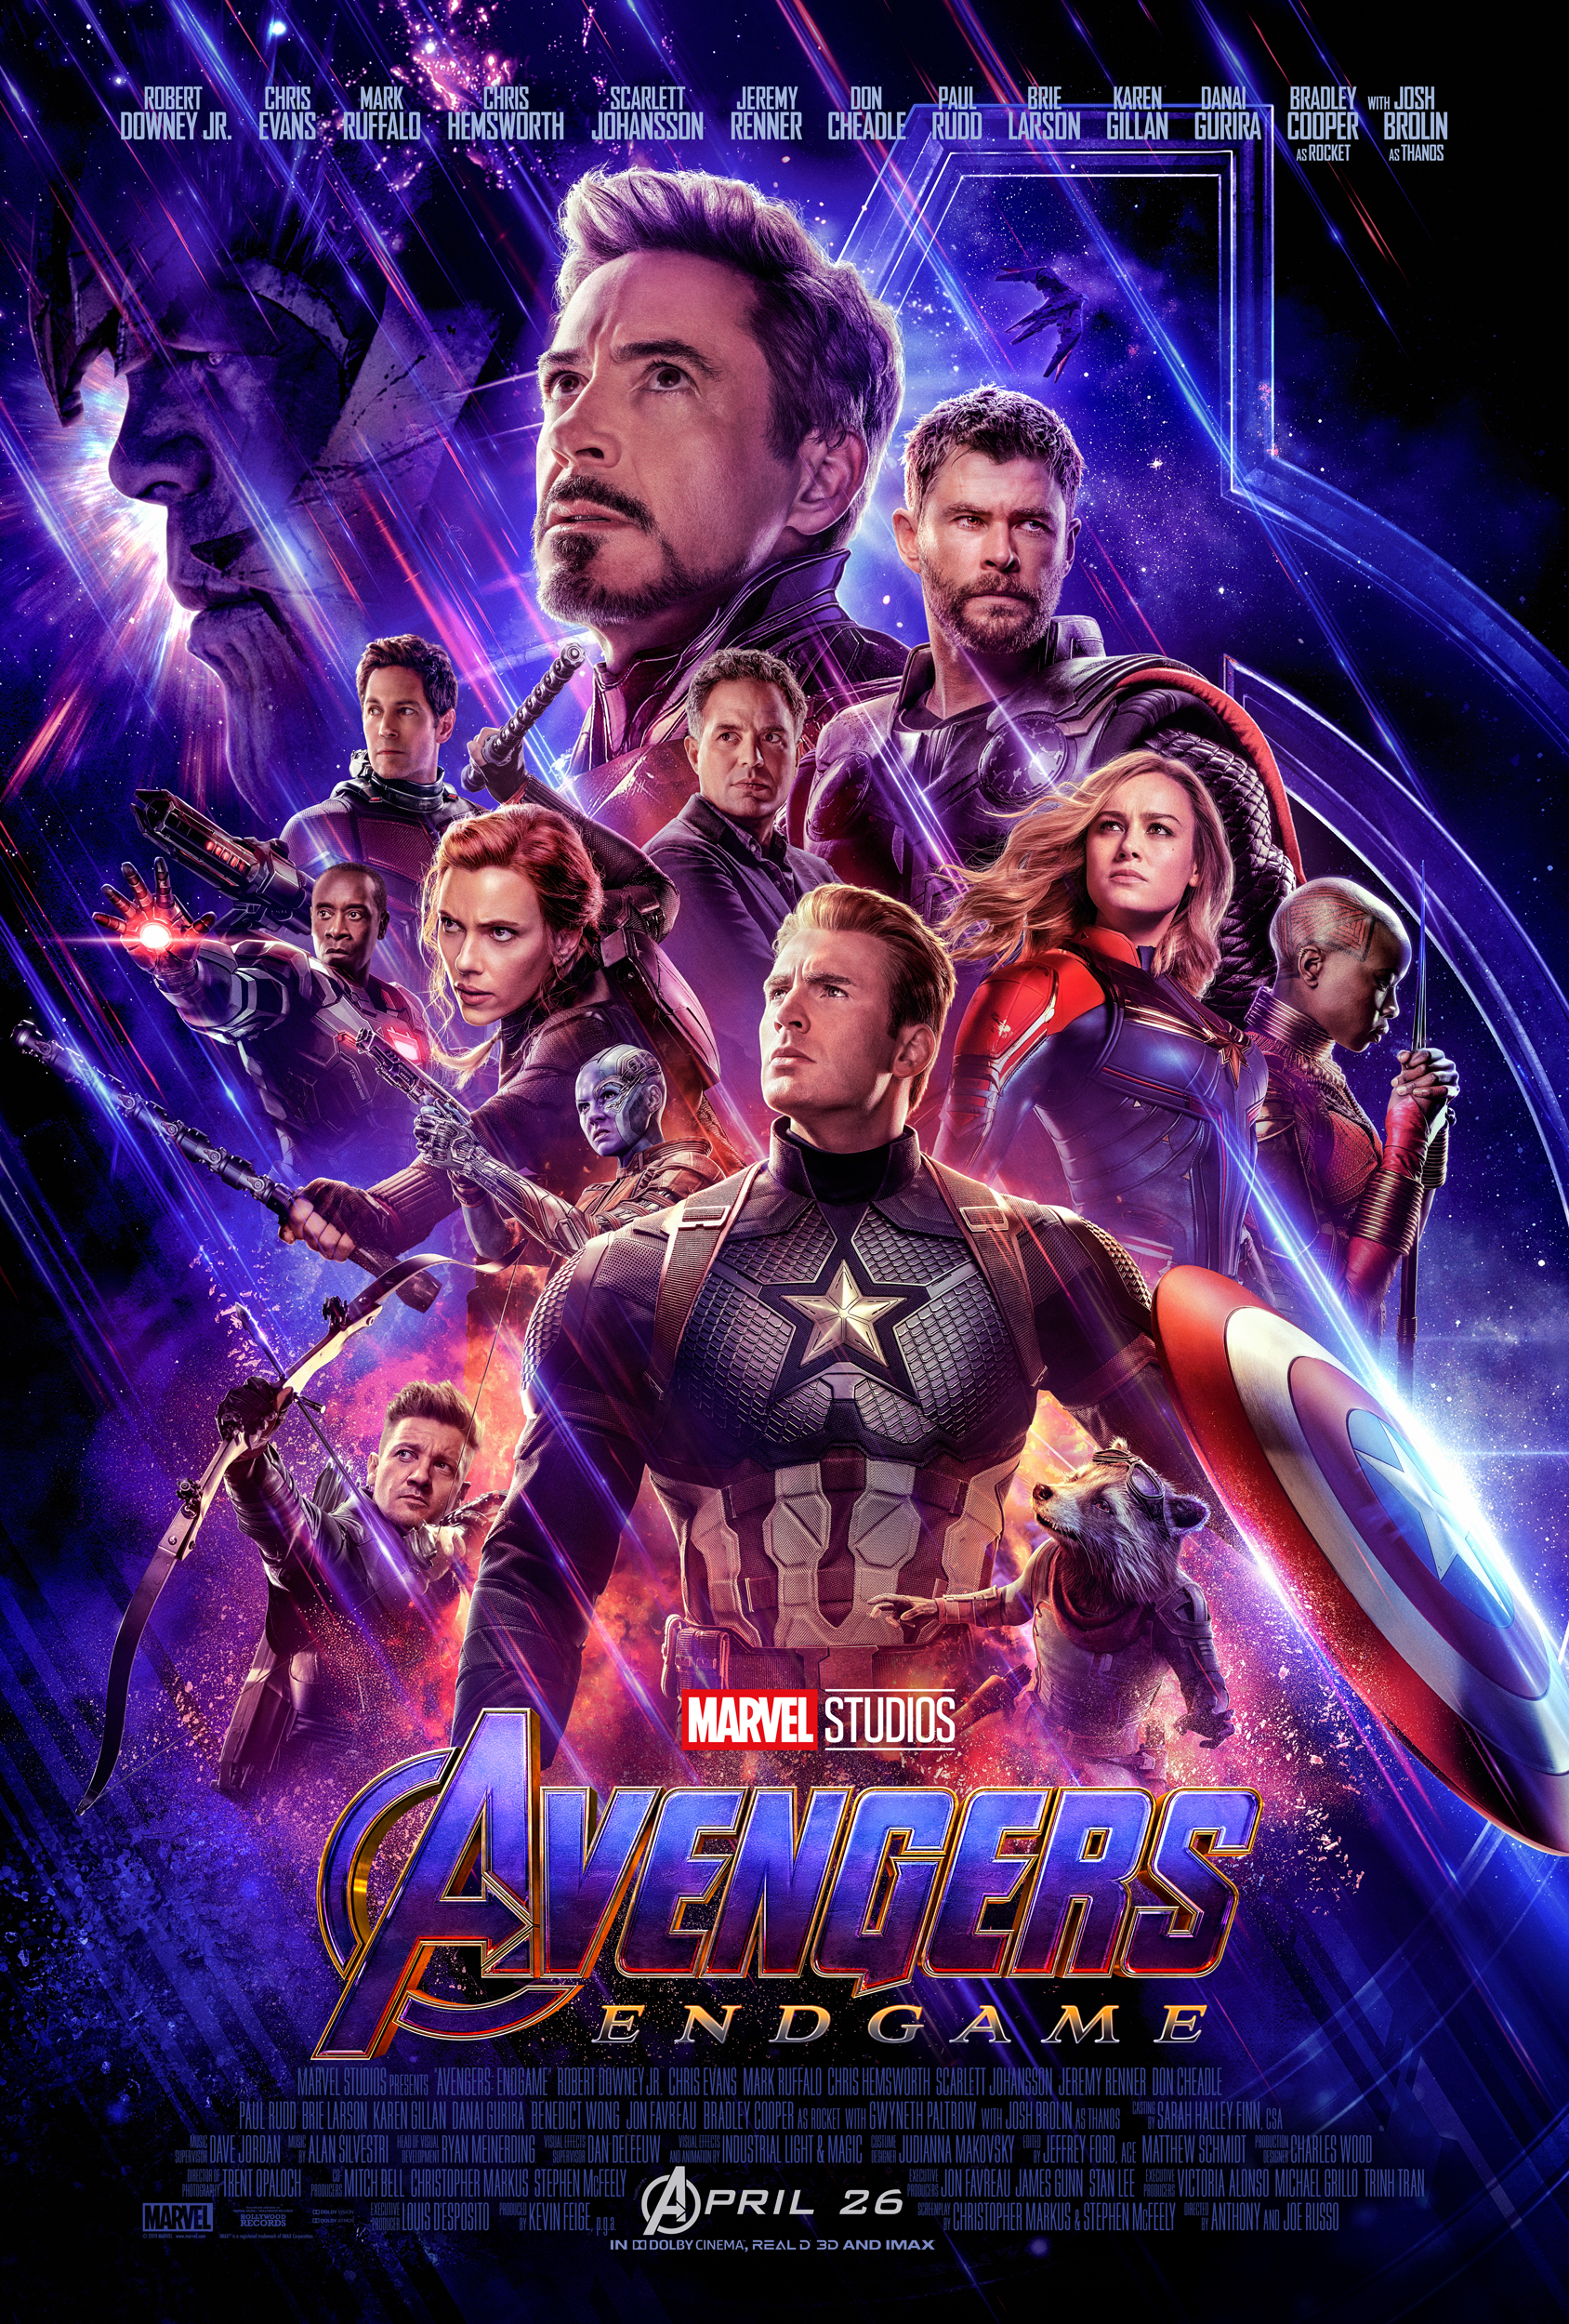 Avengers: Endgame  Marvel Cinematic Universe Wiki  FANDOM powered by Wikia